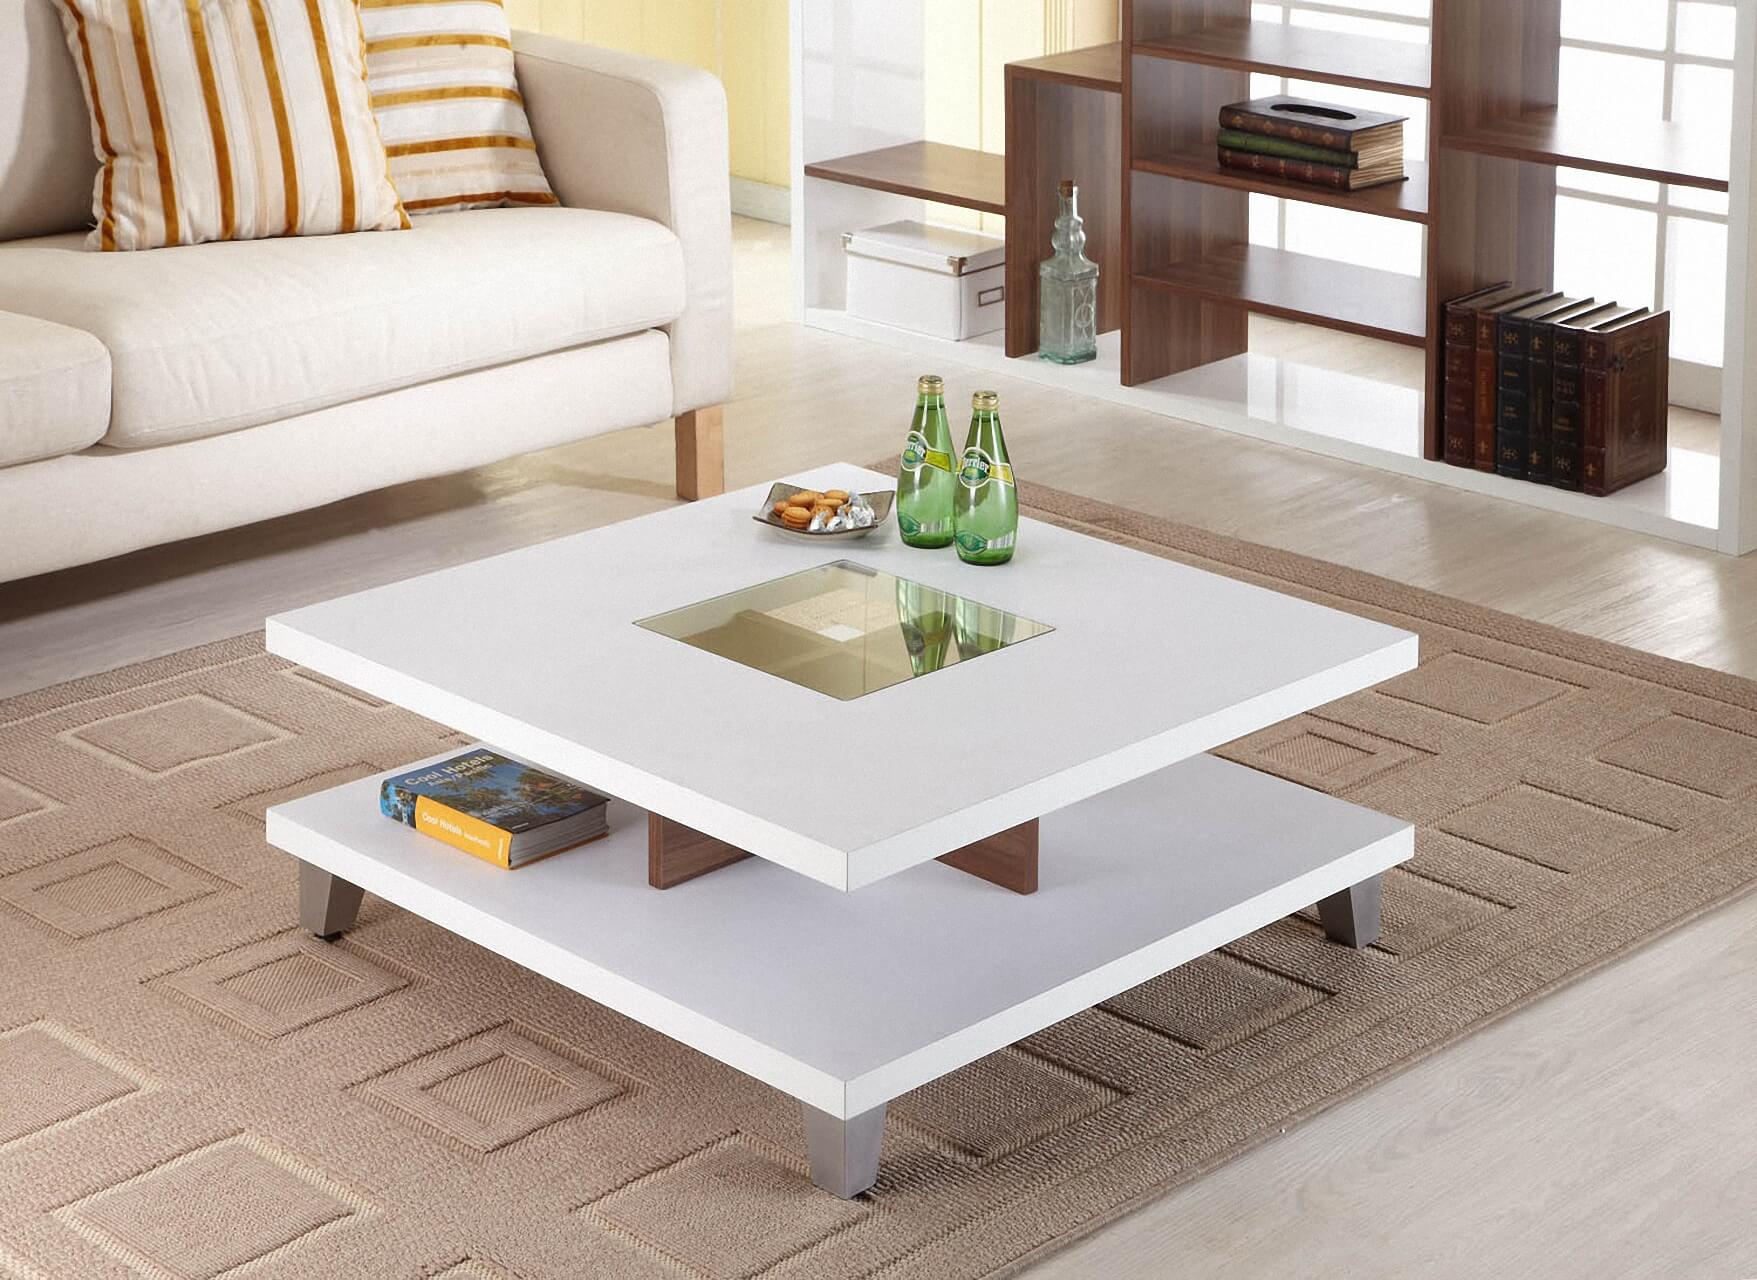 Wooden Center Table Designs For Living Room